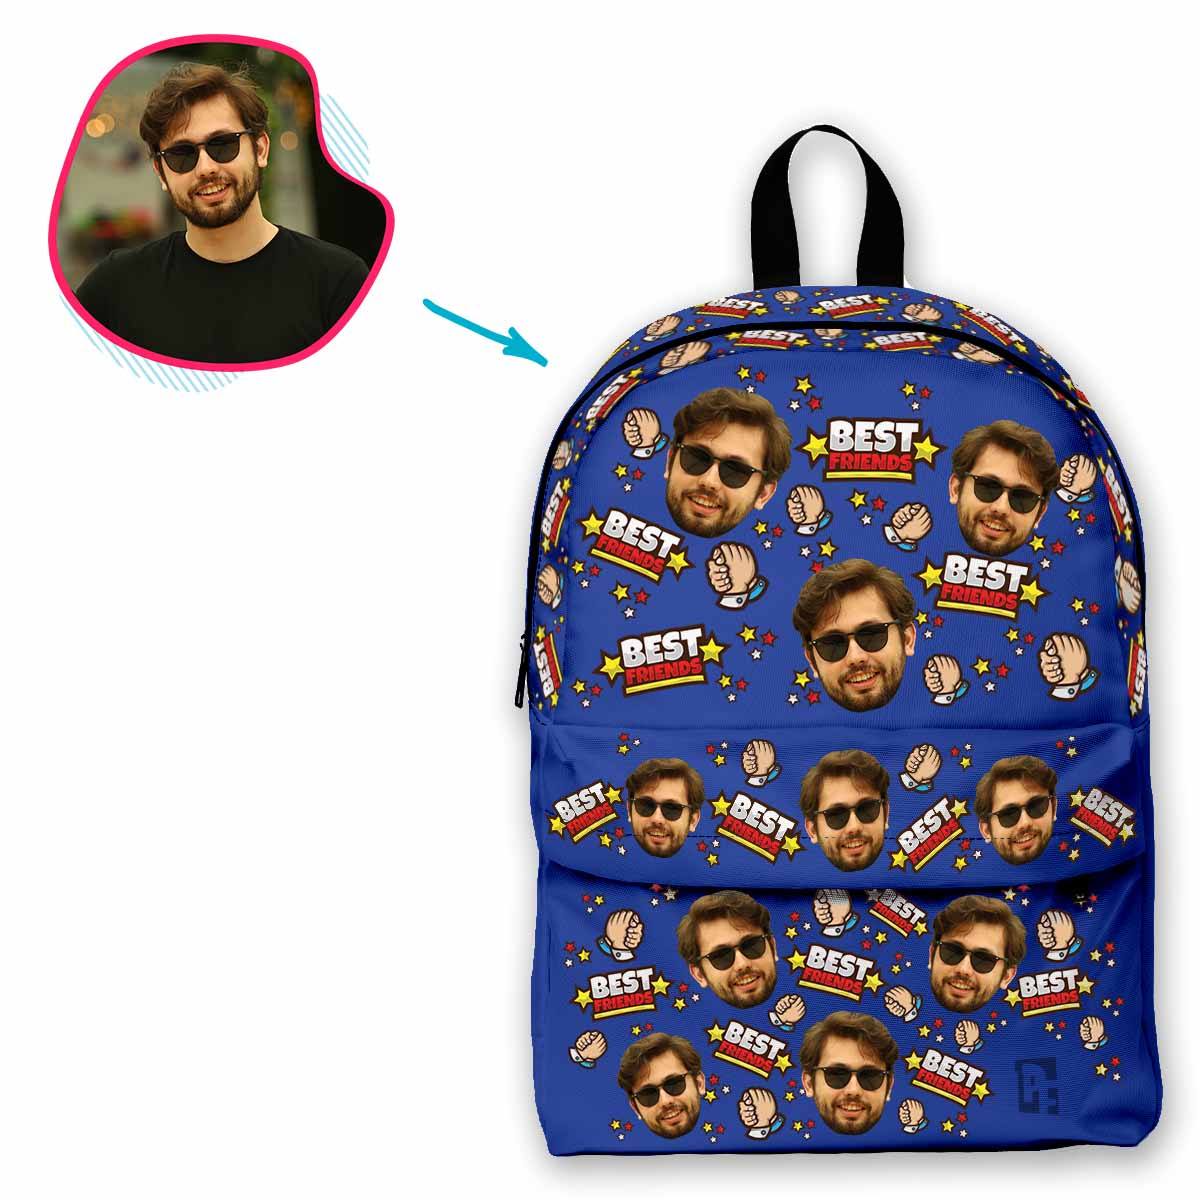 darkblue Best Friends classic backpack personalized with photo of face printed on it